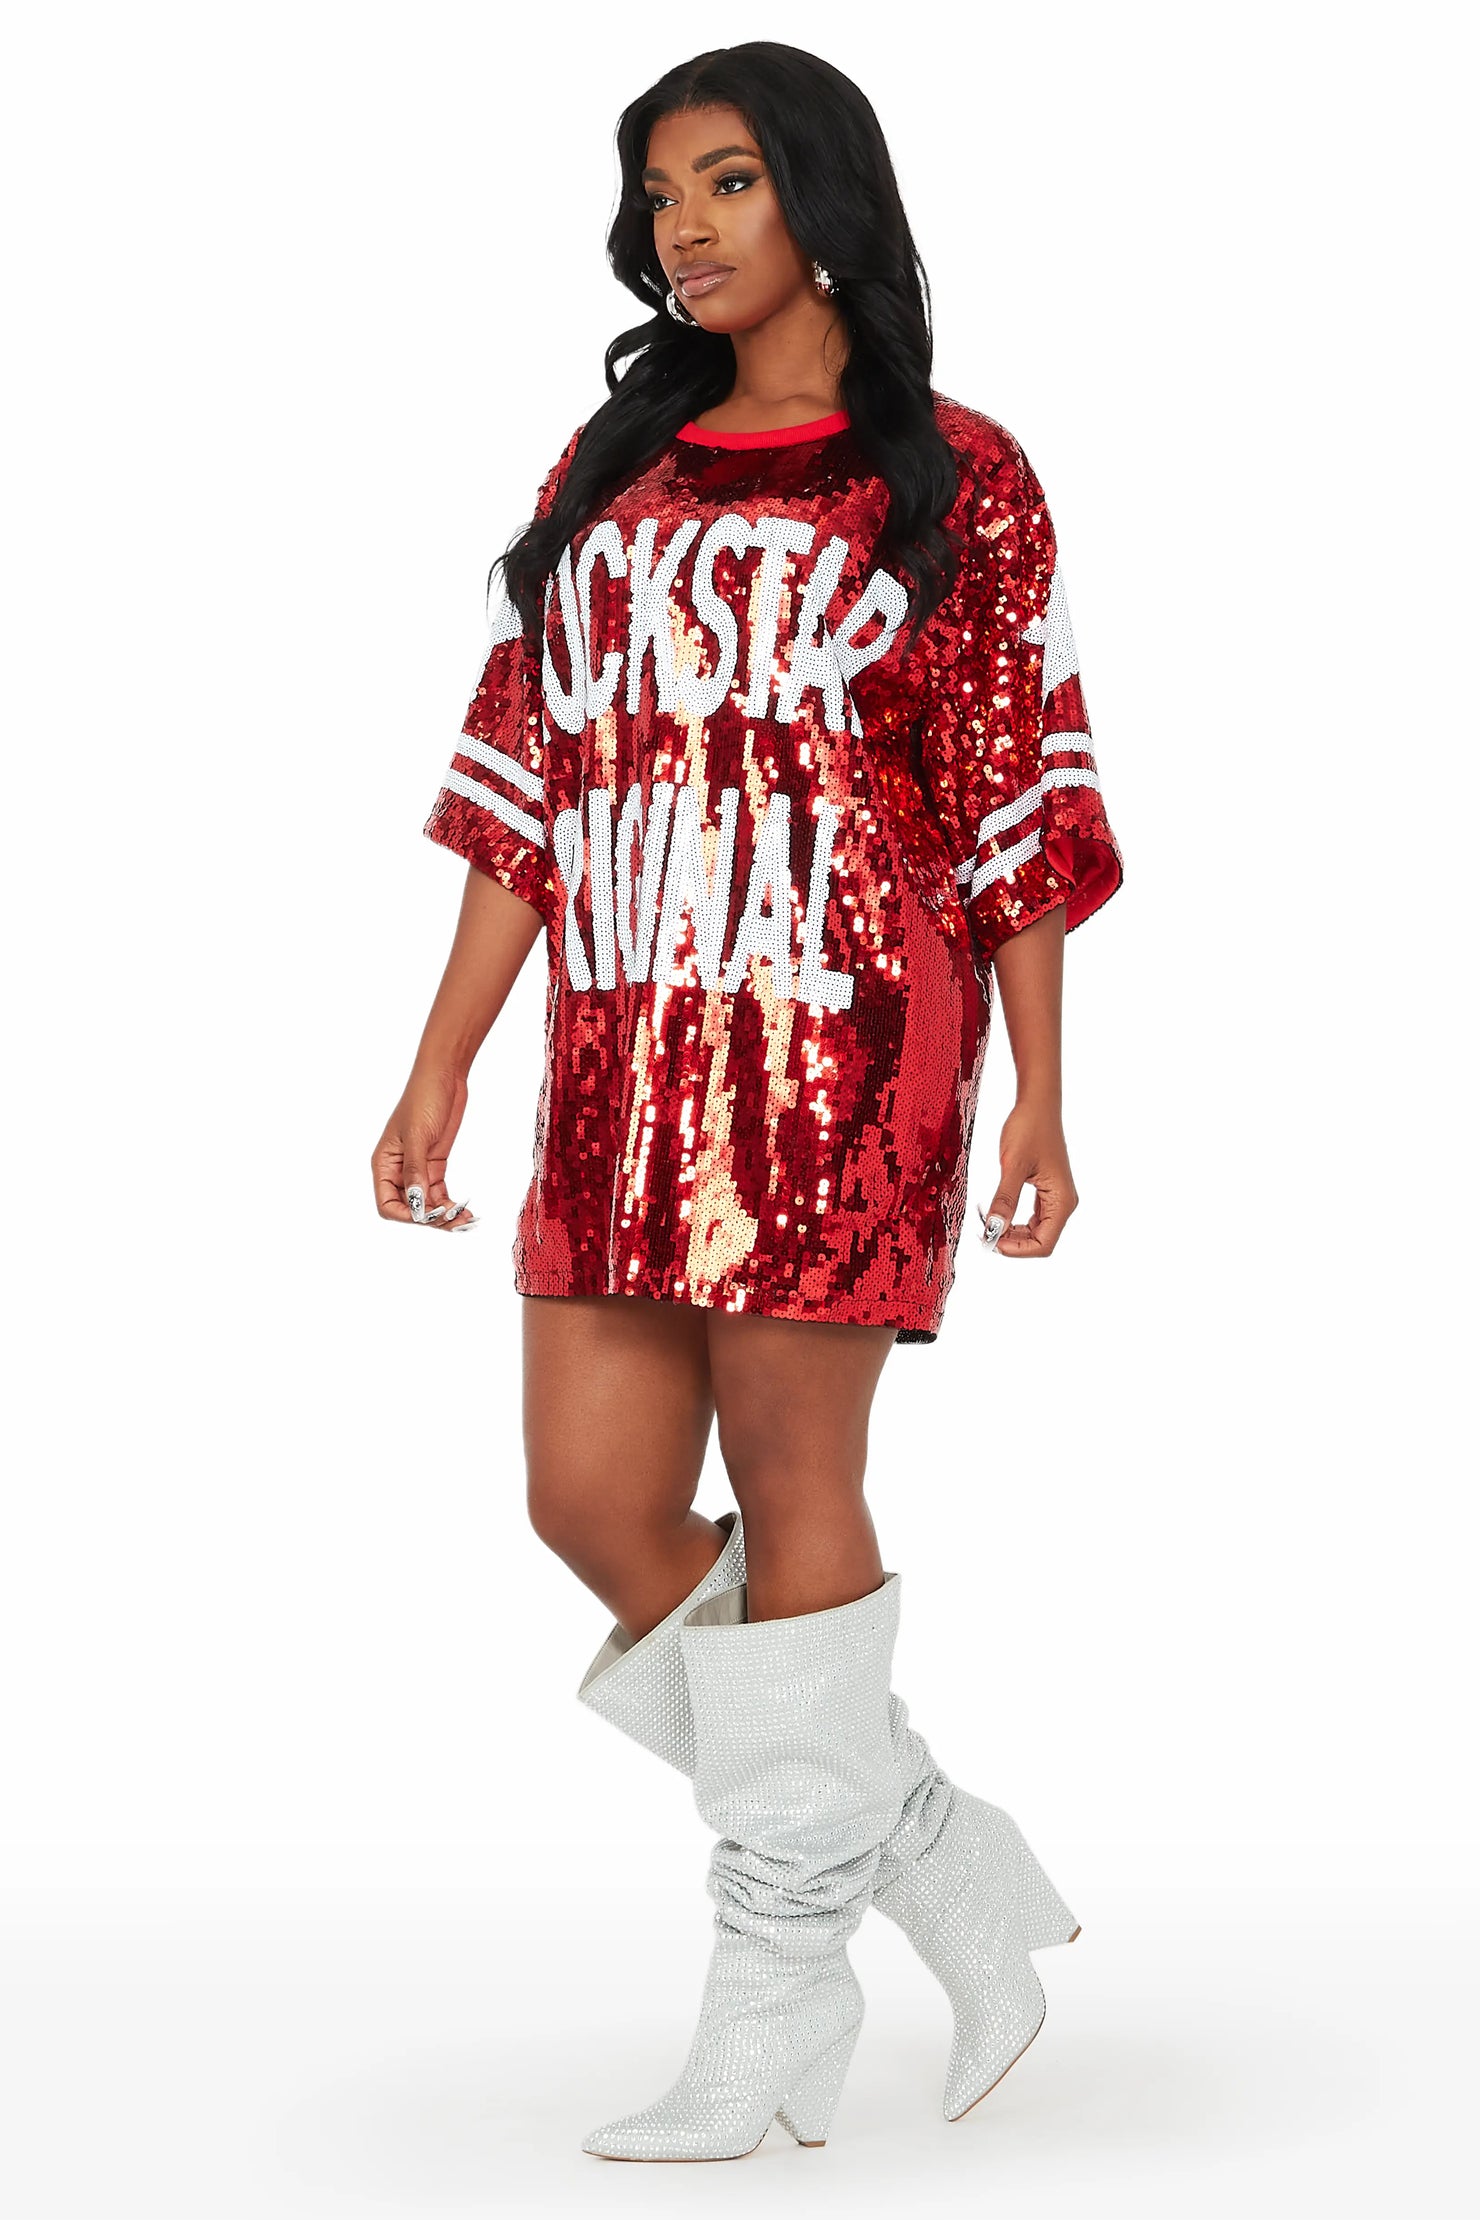 Gameday Red Sequin Mini Dress